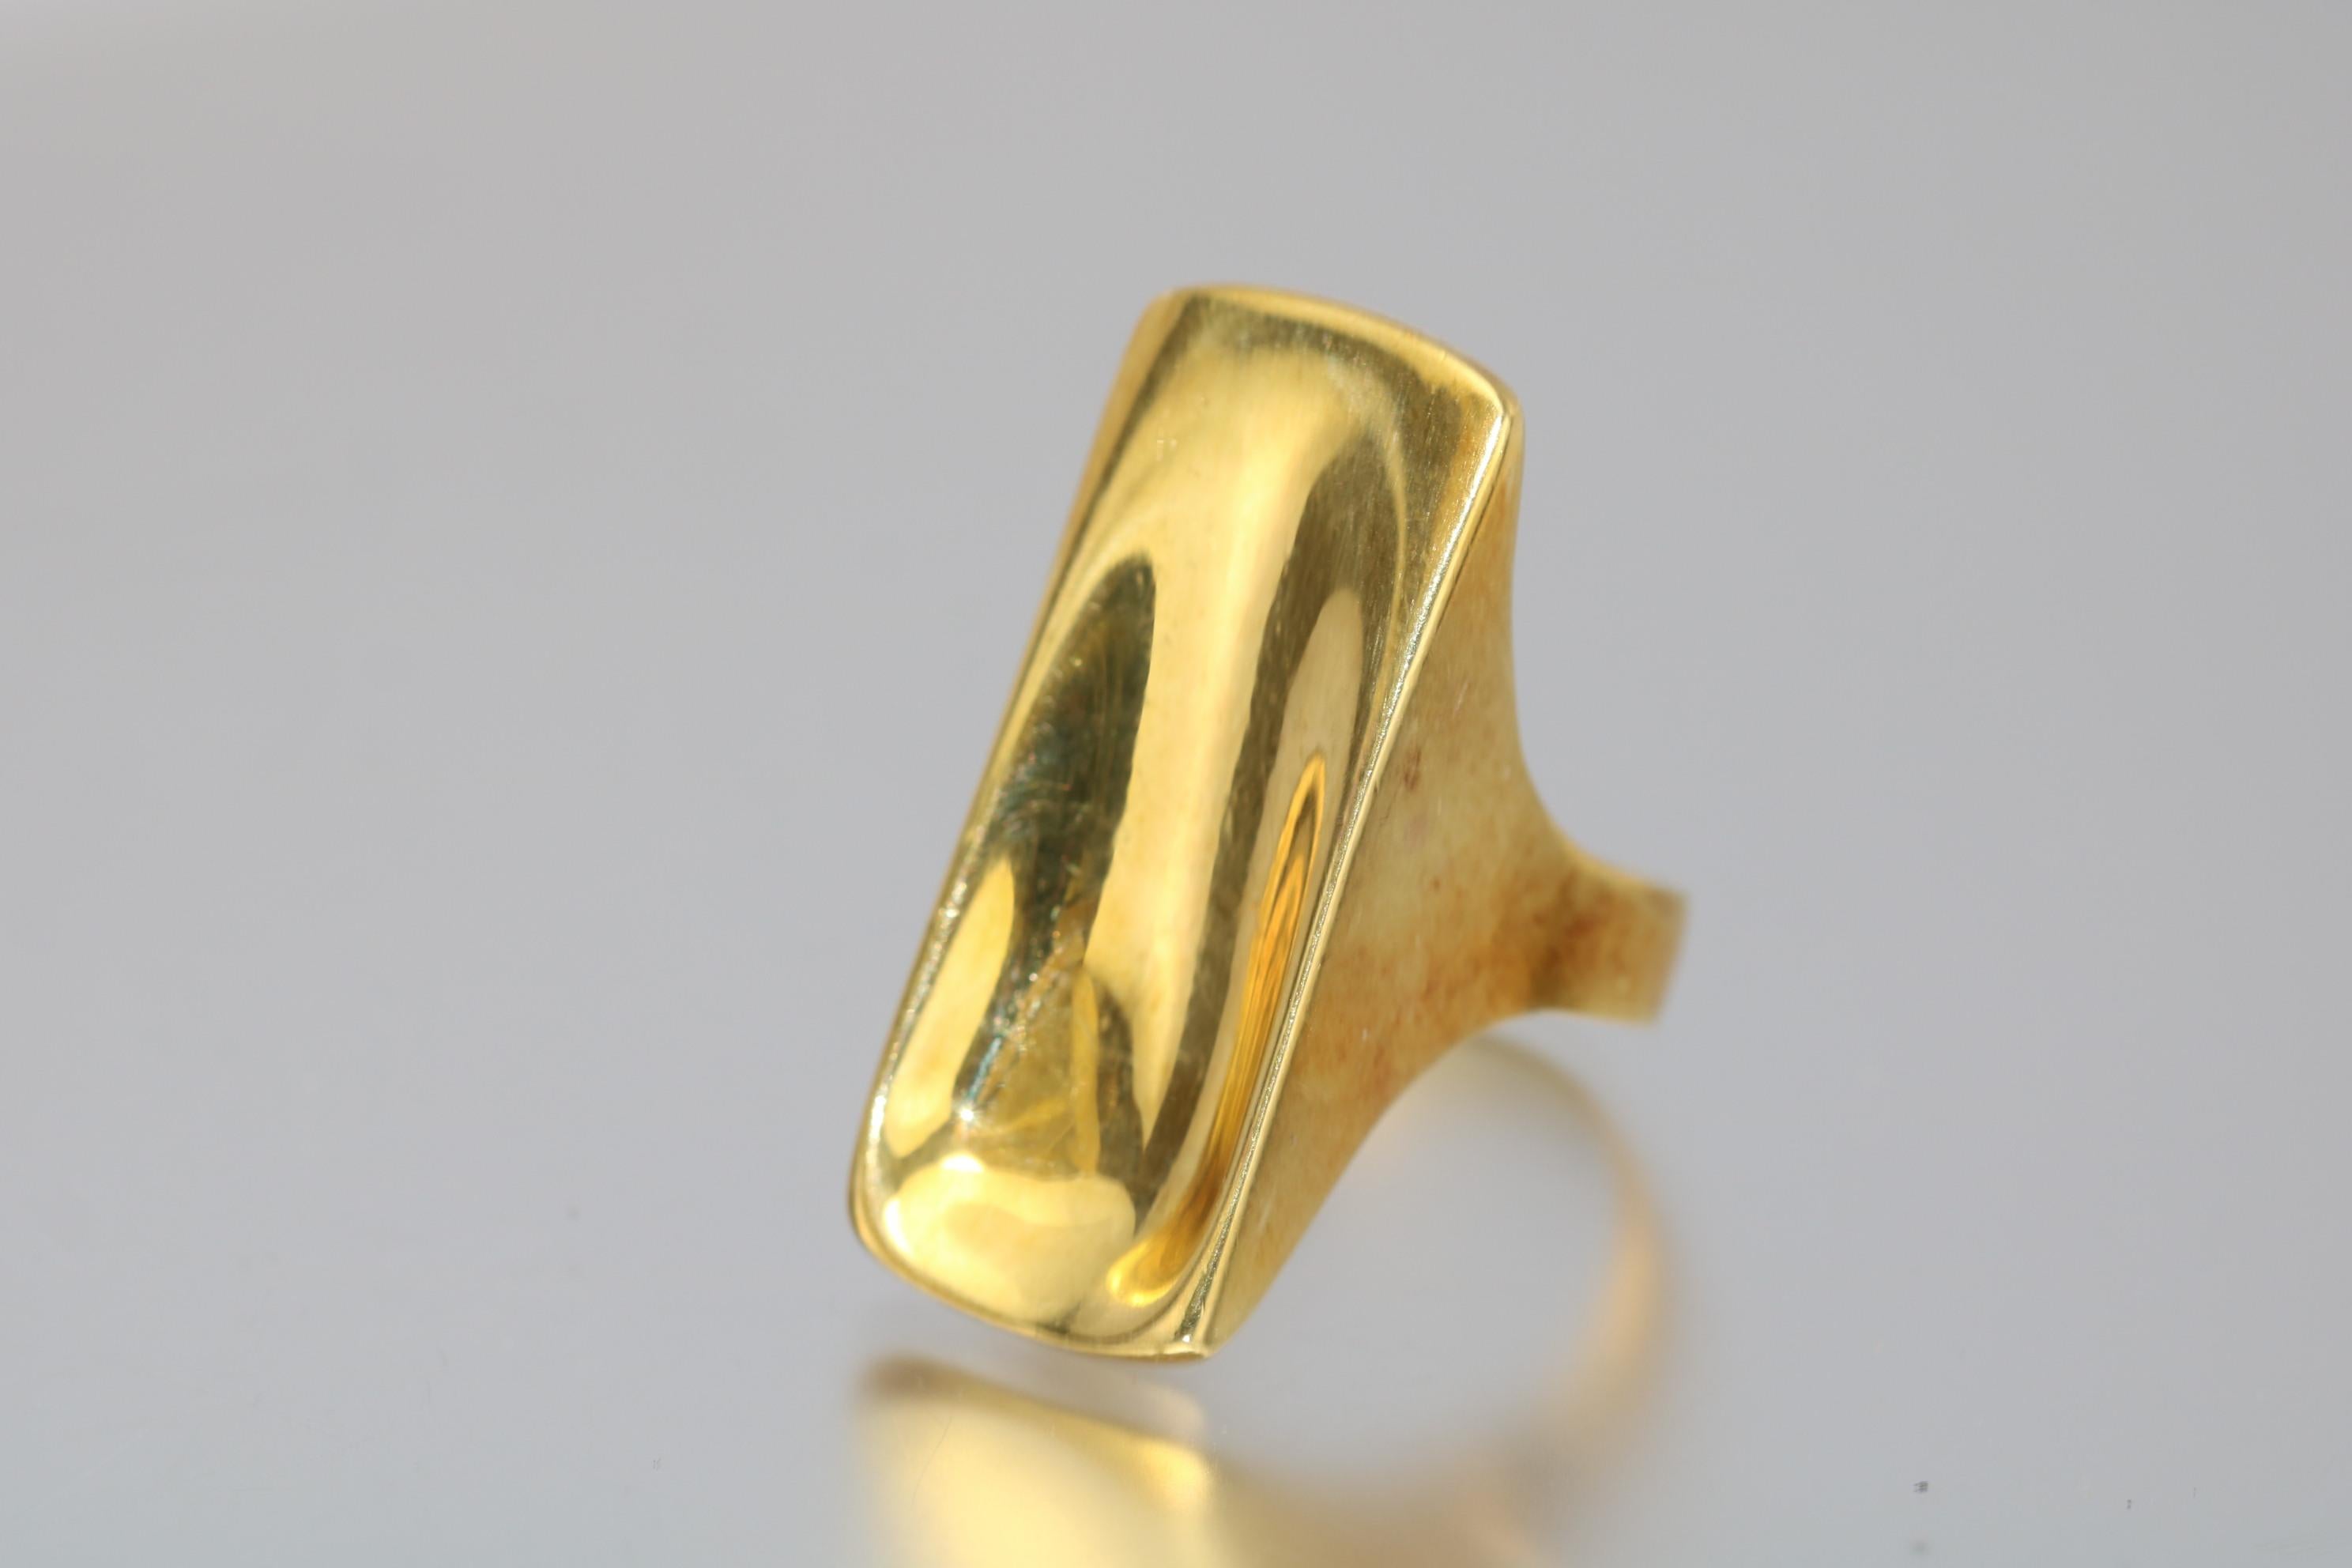 Vintage Robert Lee Morris 18k Yellow Gold Ring 43.7g ring size 9 1/2

Robert Lee Morris is a jewelry designer and sculptor whose collaborations with some of the top designers in the 1970s & 1980s made him a household name. His Artwear & RLM